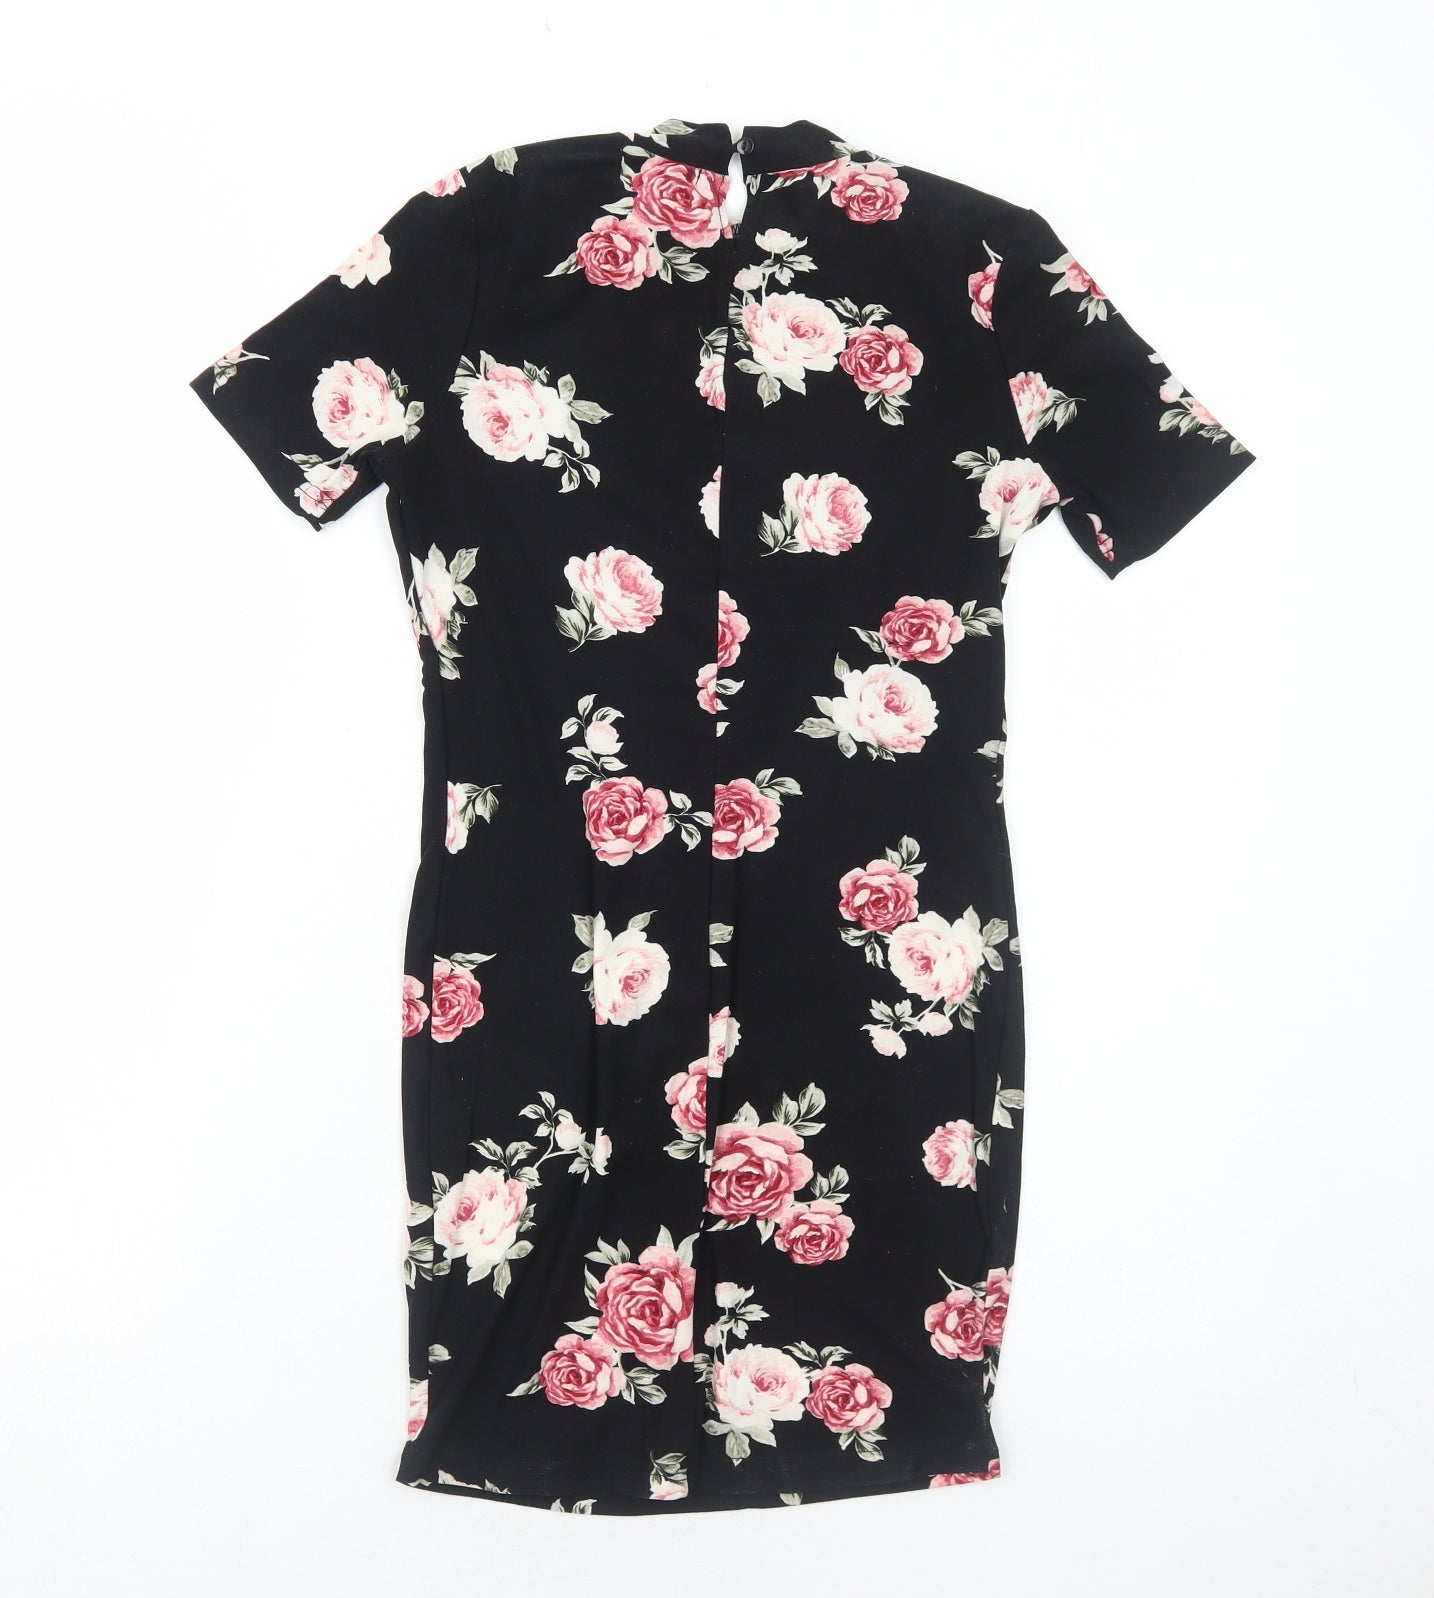 New Look Girls Black Floral Polyester T-Shirt Dress Size 9 Years Mock Neck Button